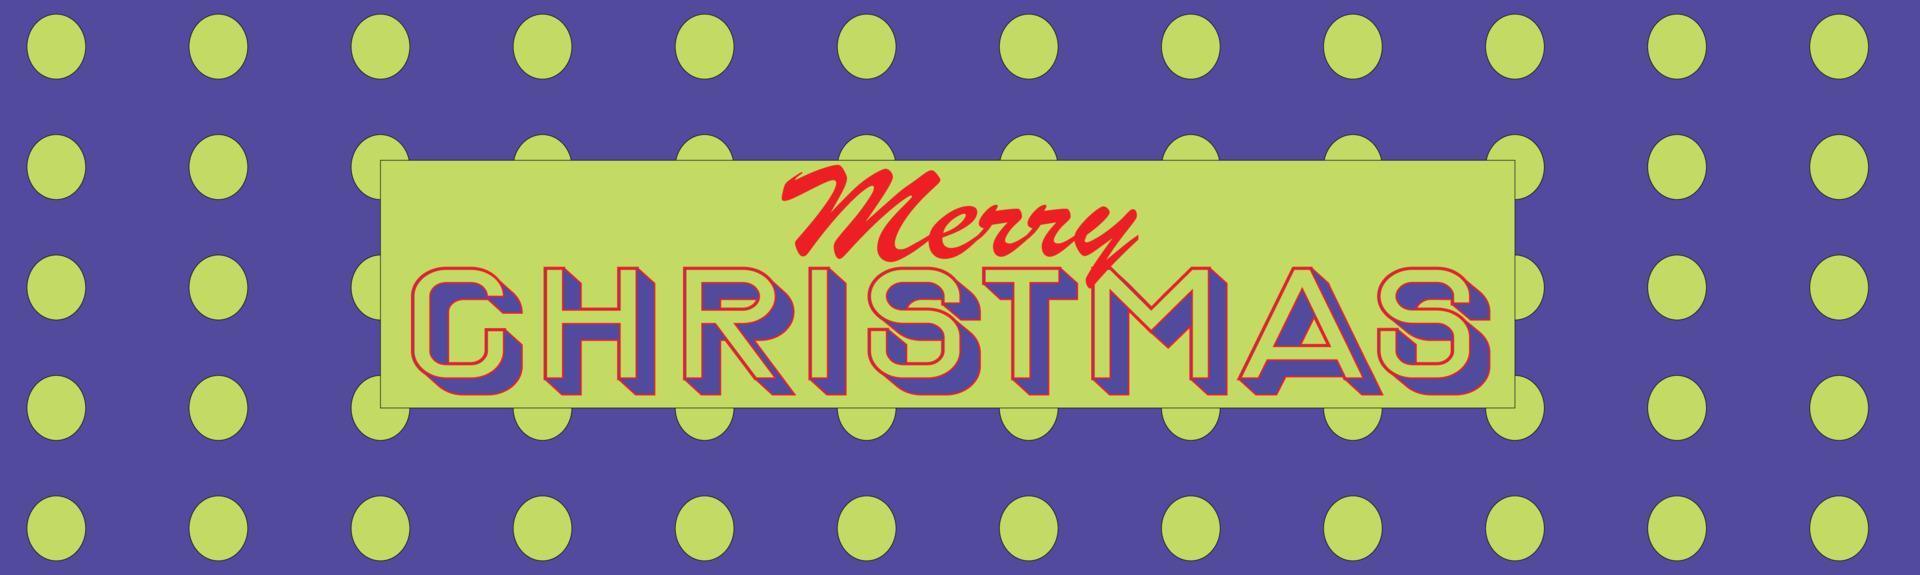 Merry Christmas horizontal web banner with Christmas Typography and Doots on Light color background, Chrismas greeting banner, headers, posters, cards, website. Web banner, Vector illustration.